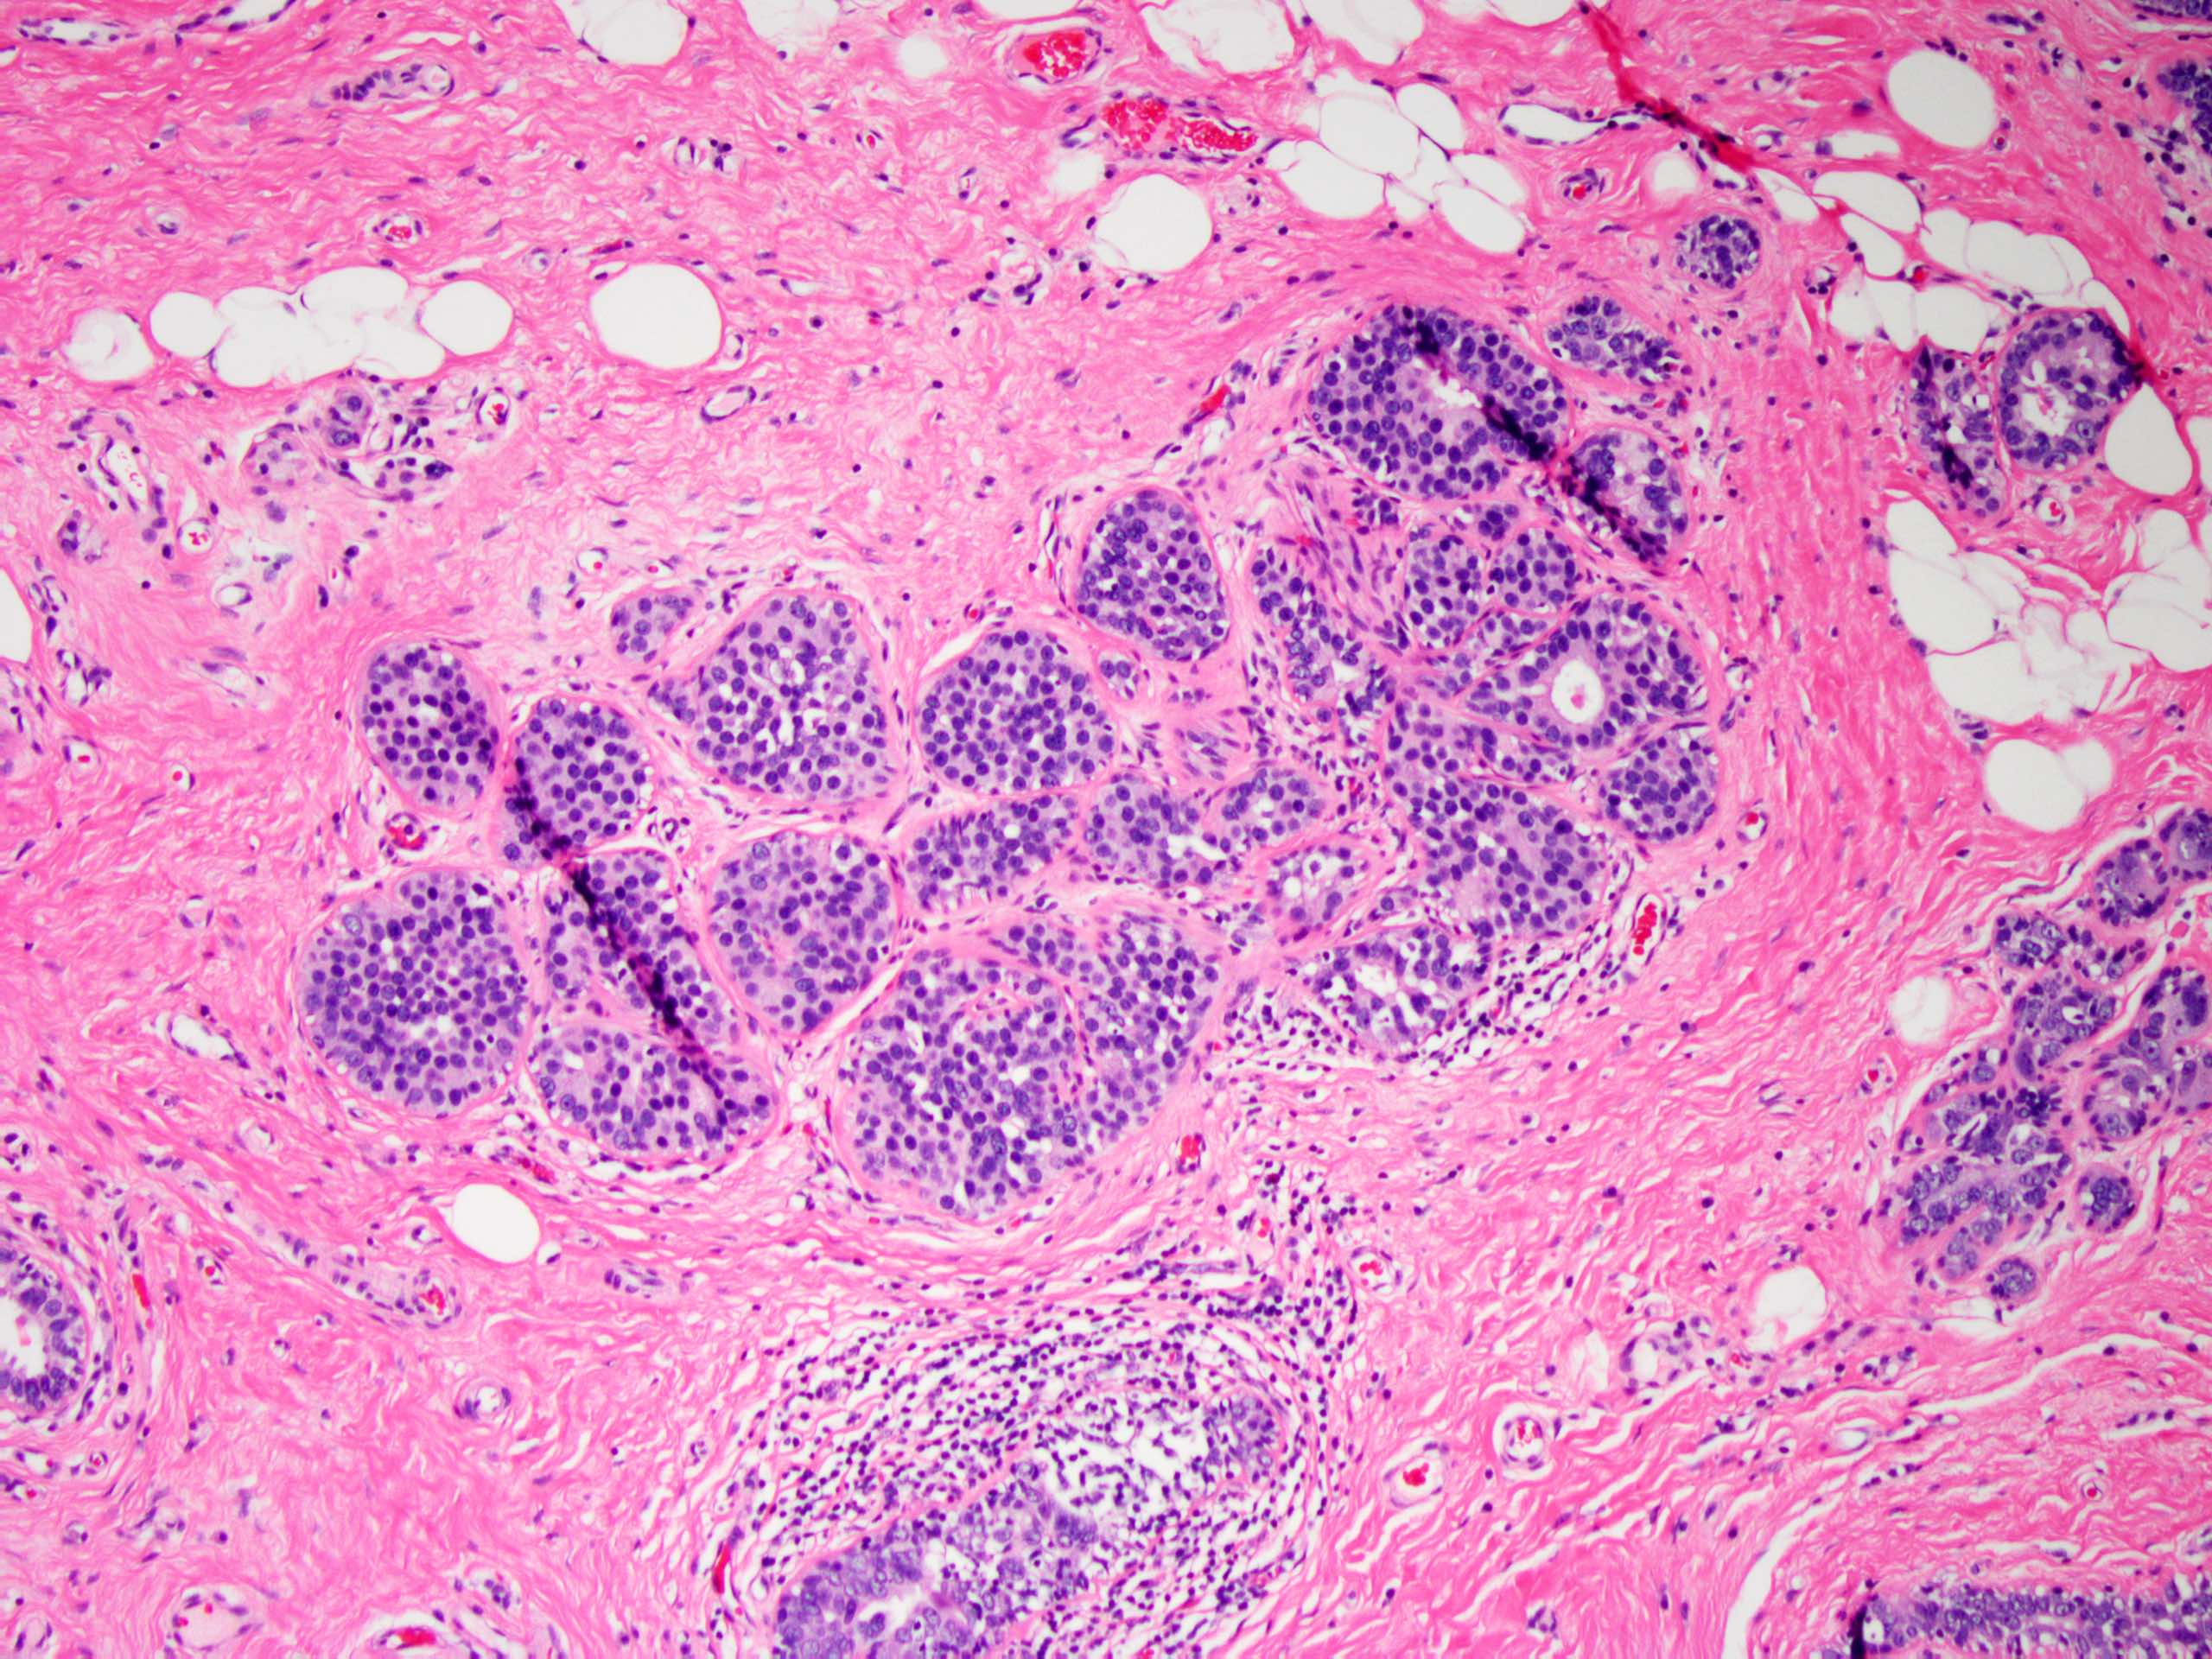 Ductal carcinoma in situ with lobular features